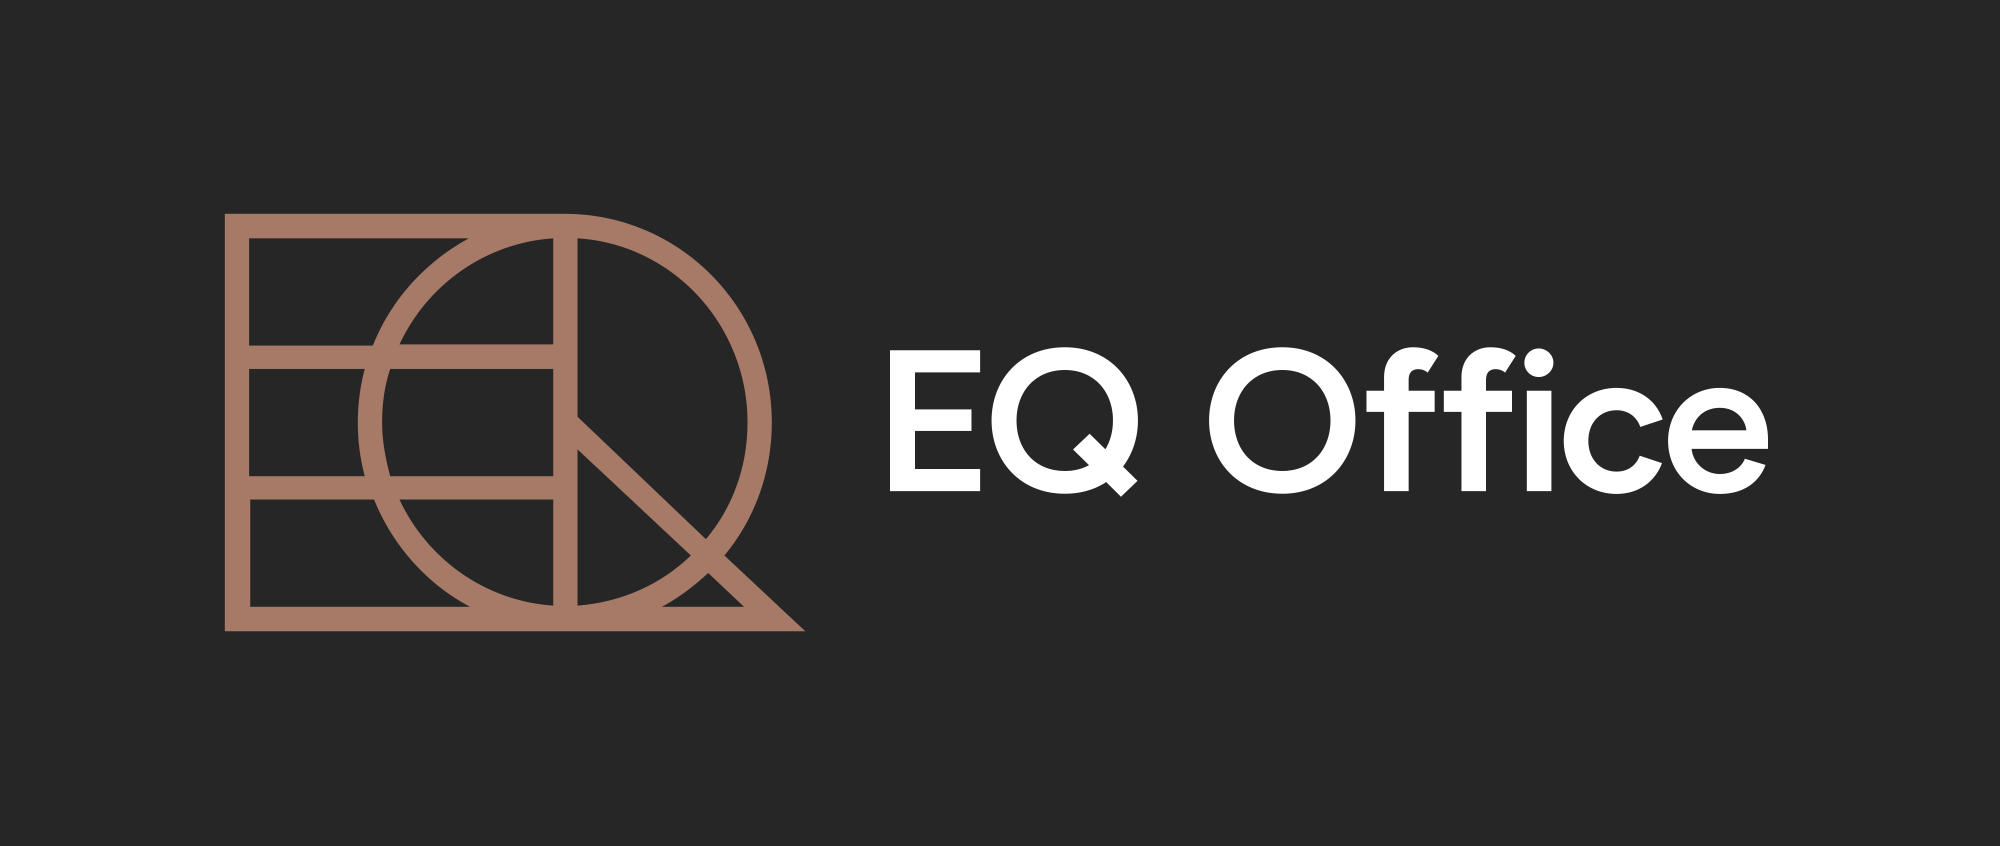 EQ Logo - Brand New: New Logo and Identity for EQ Office by Friends